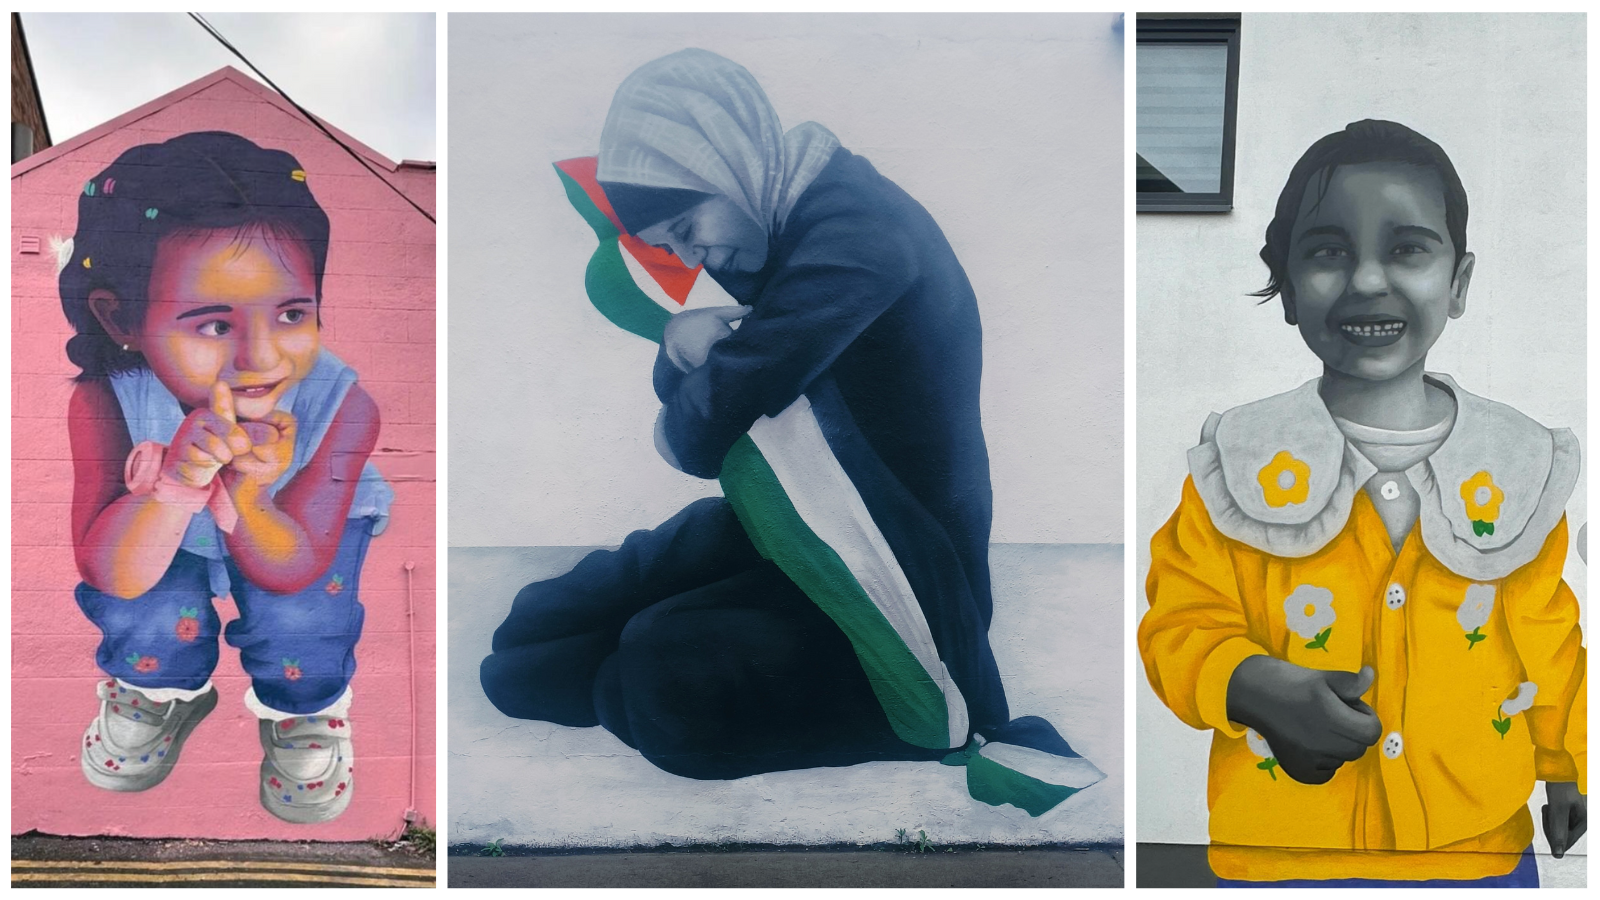 When Walls Break Barriers: How an Artist’s Murals in Ireland Forged a Life-Saving Friendship From Dublin to Gaza